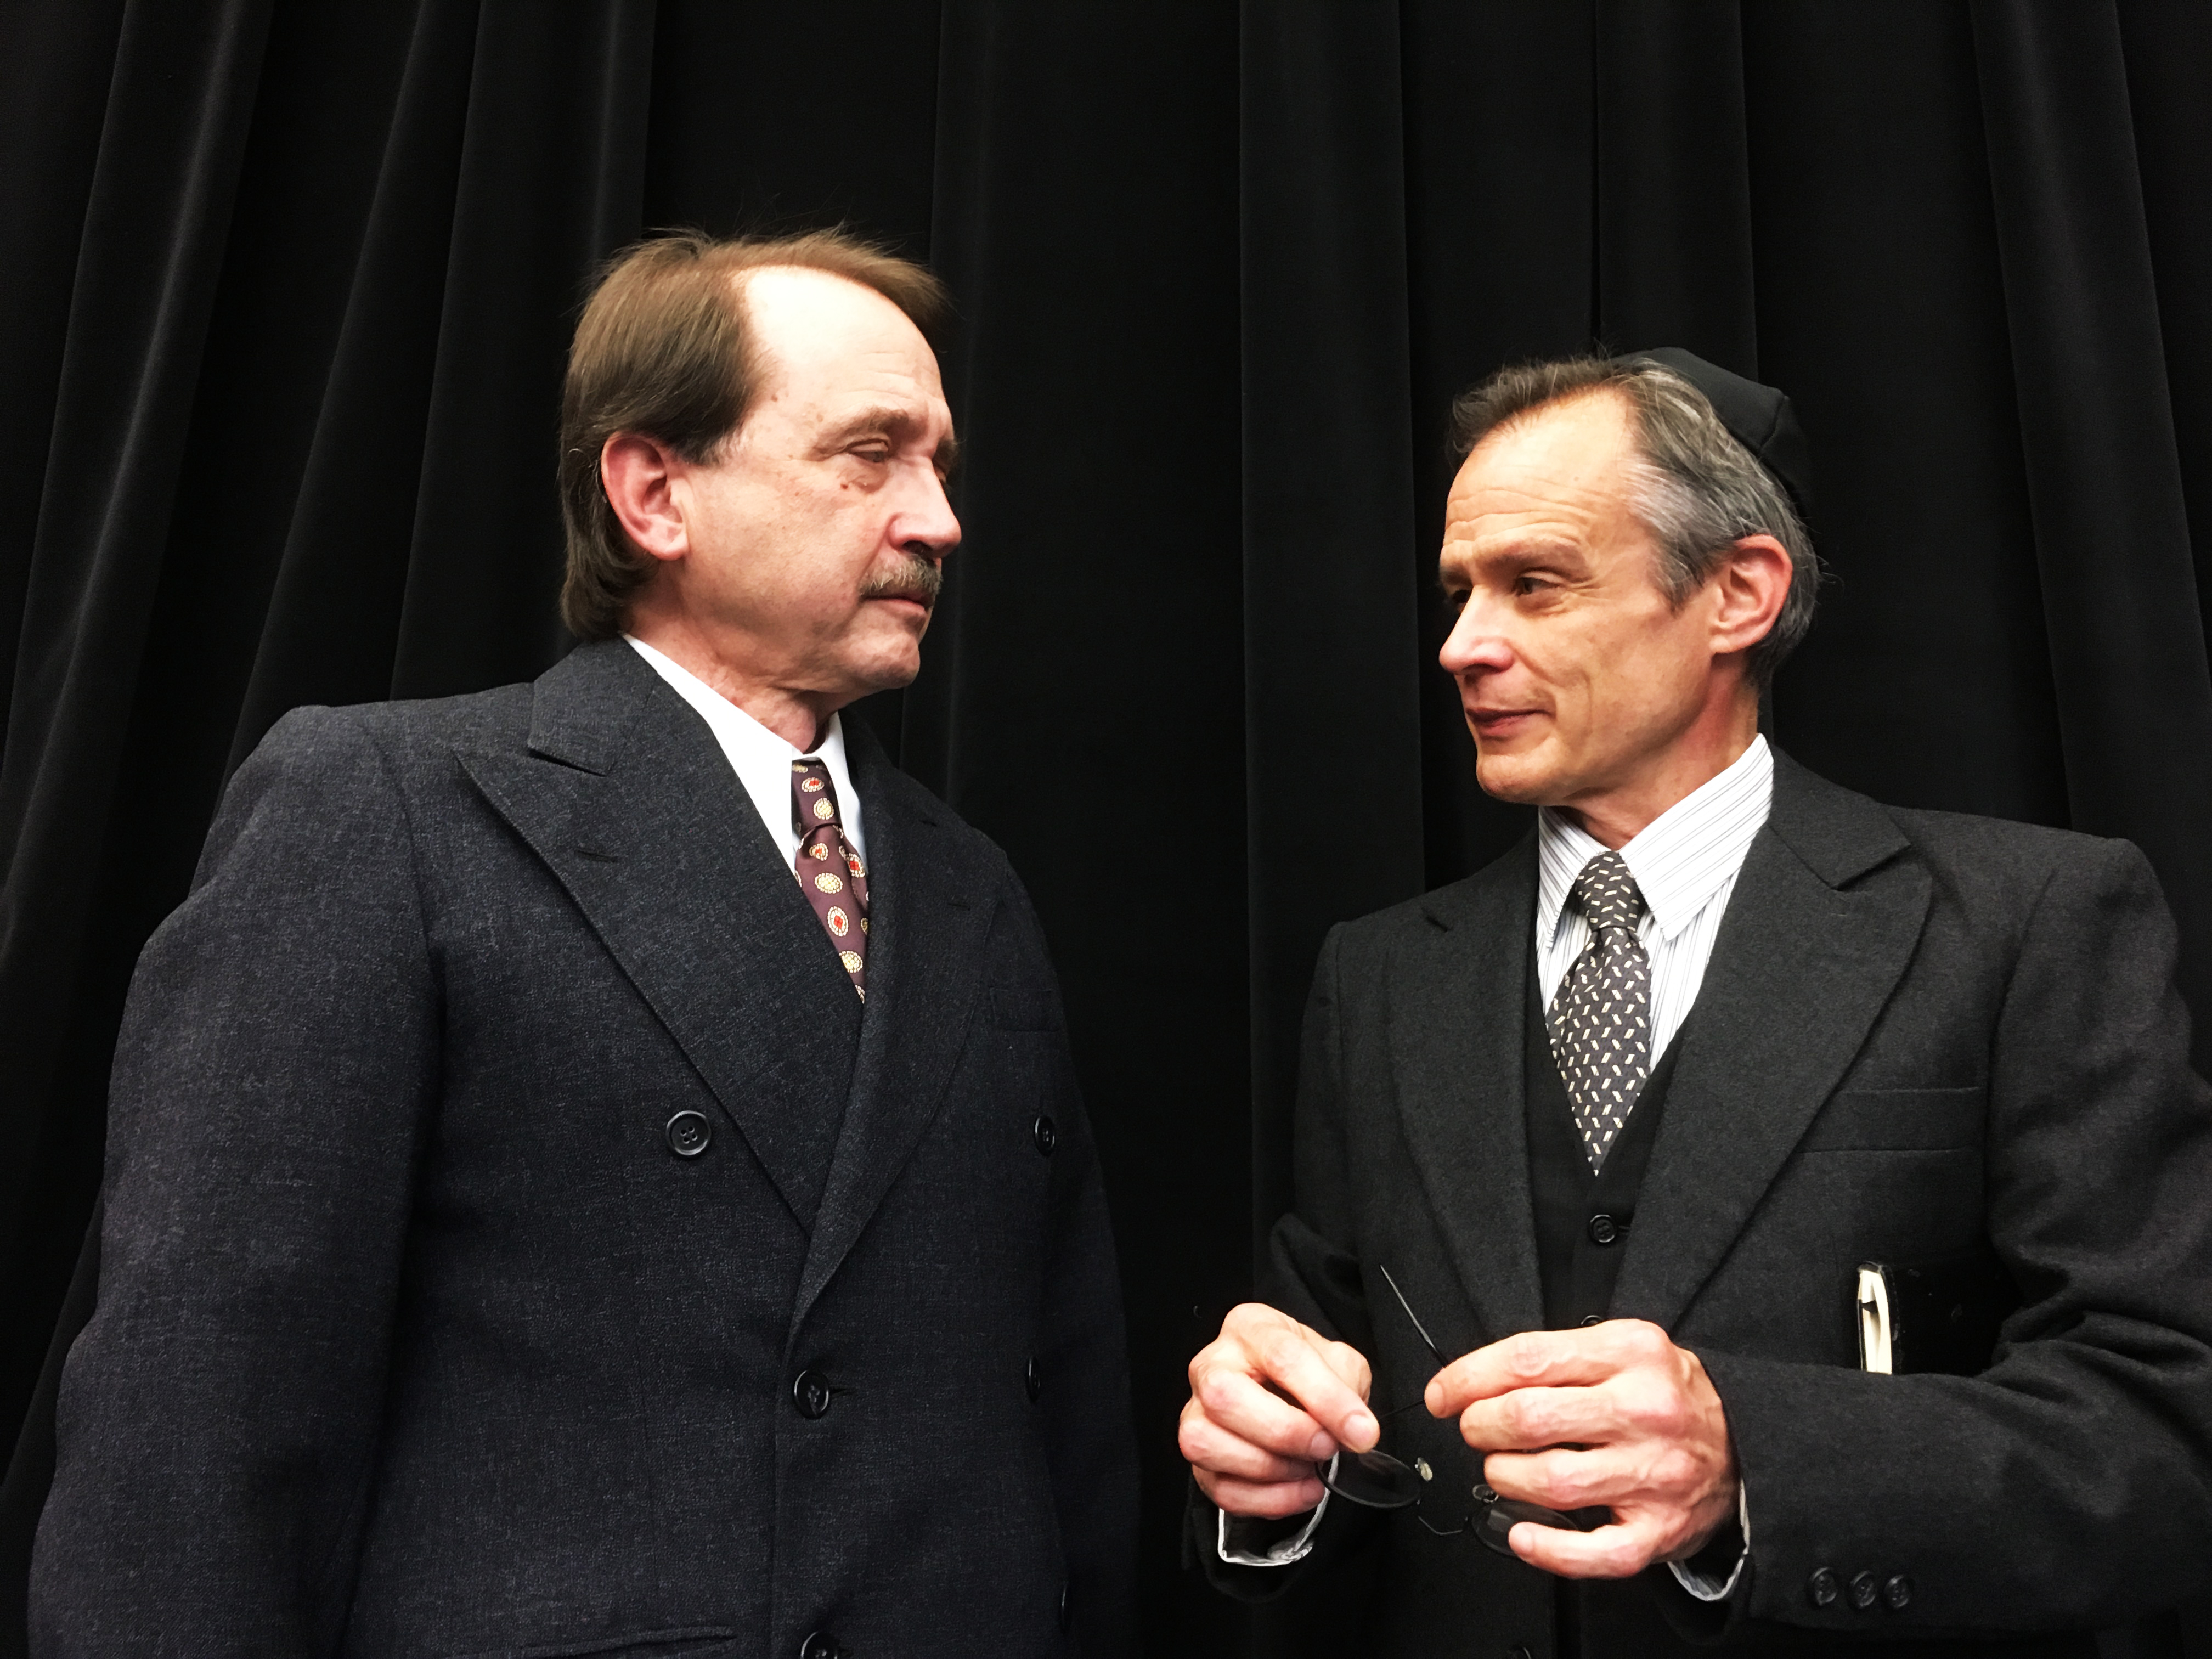 Antonio (Martin Giles, L) and Shylock (James FitzGerald) have a business relationship. Not shown: the monkey business that unfolds around them, and the ugly business that will soon erupt.